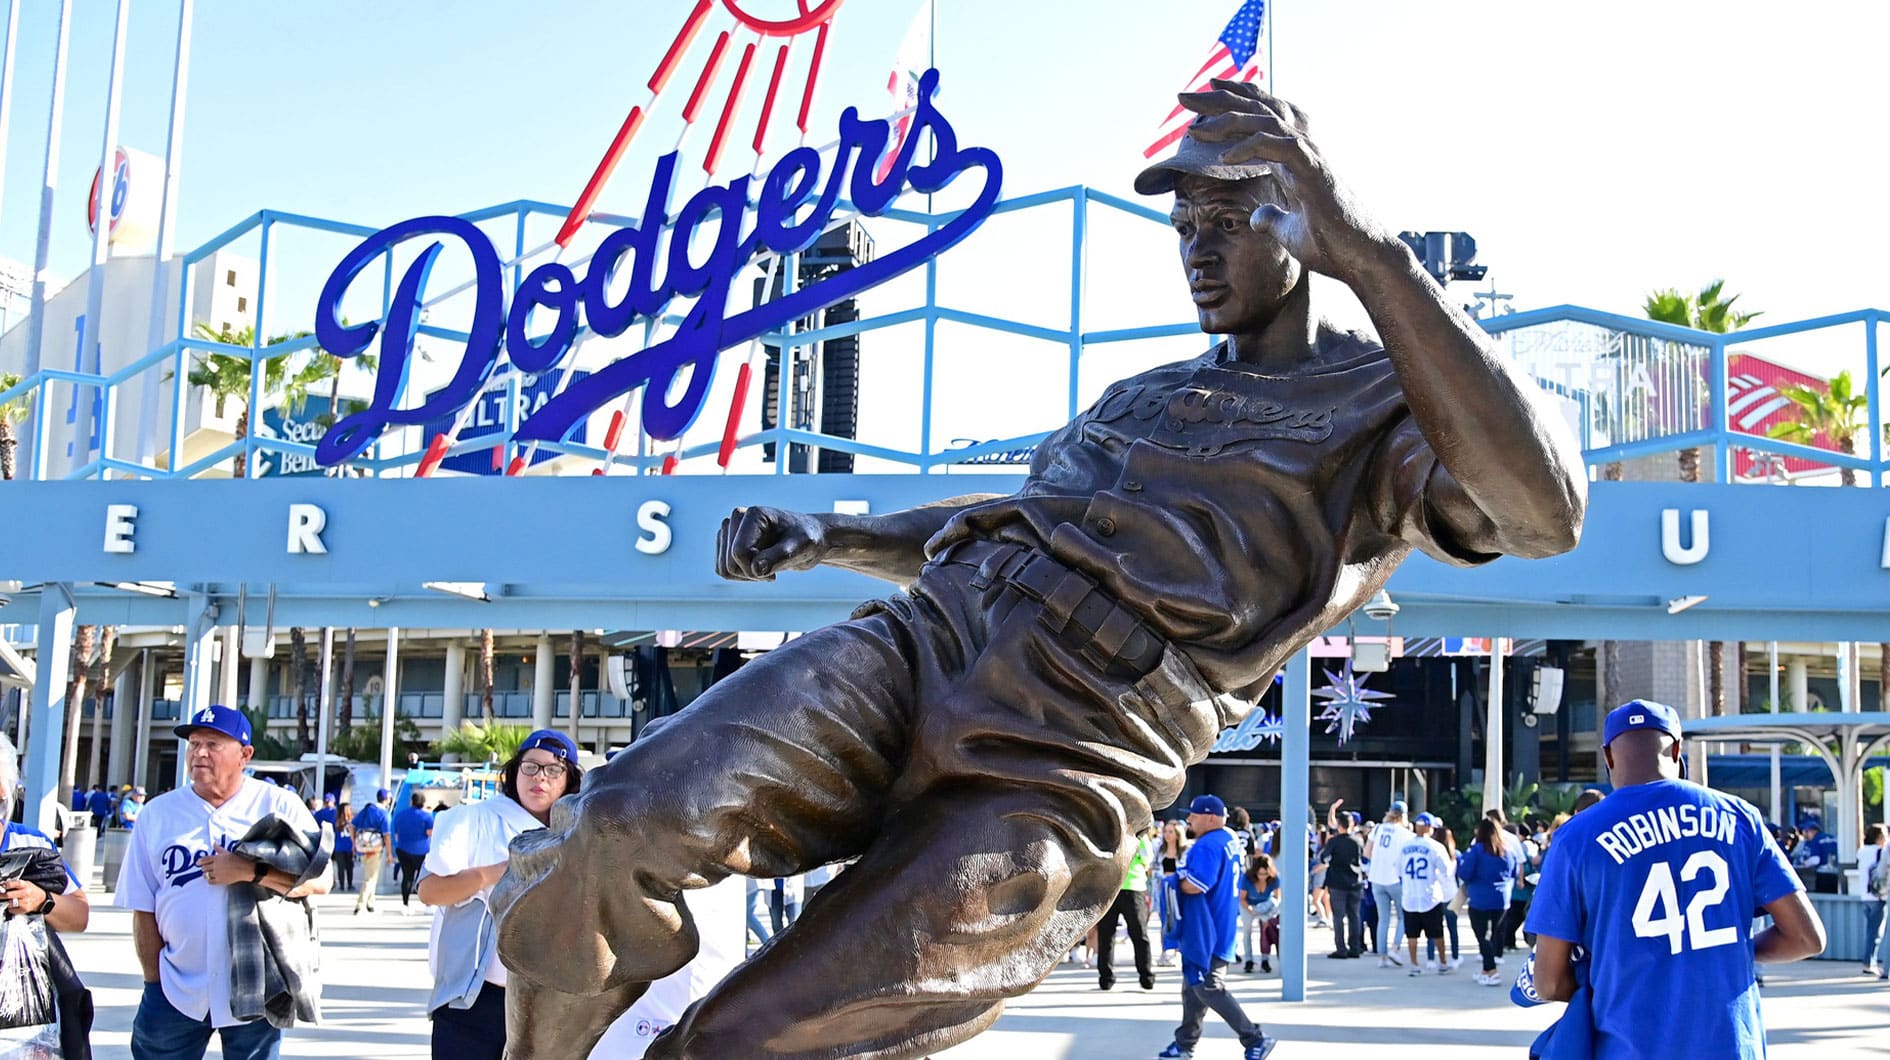 Fans take photos at the Jackie Robinson statue as they attend the game between the Los Angeles Dodgers and the Cincinnati Reds to celebrate the 75th anniversary of Jackie Robinson breaking the color barrier in Major League Baseball at Dodger Stadium.